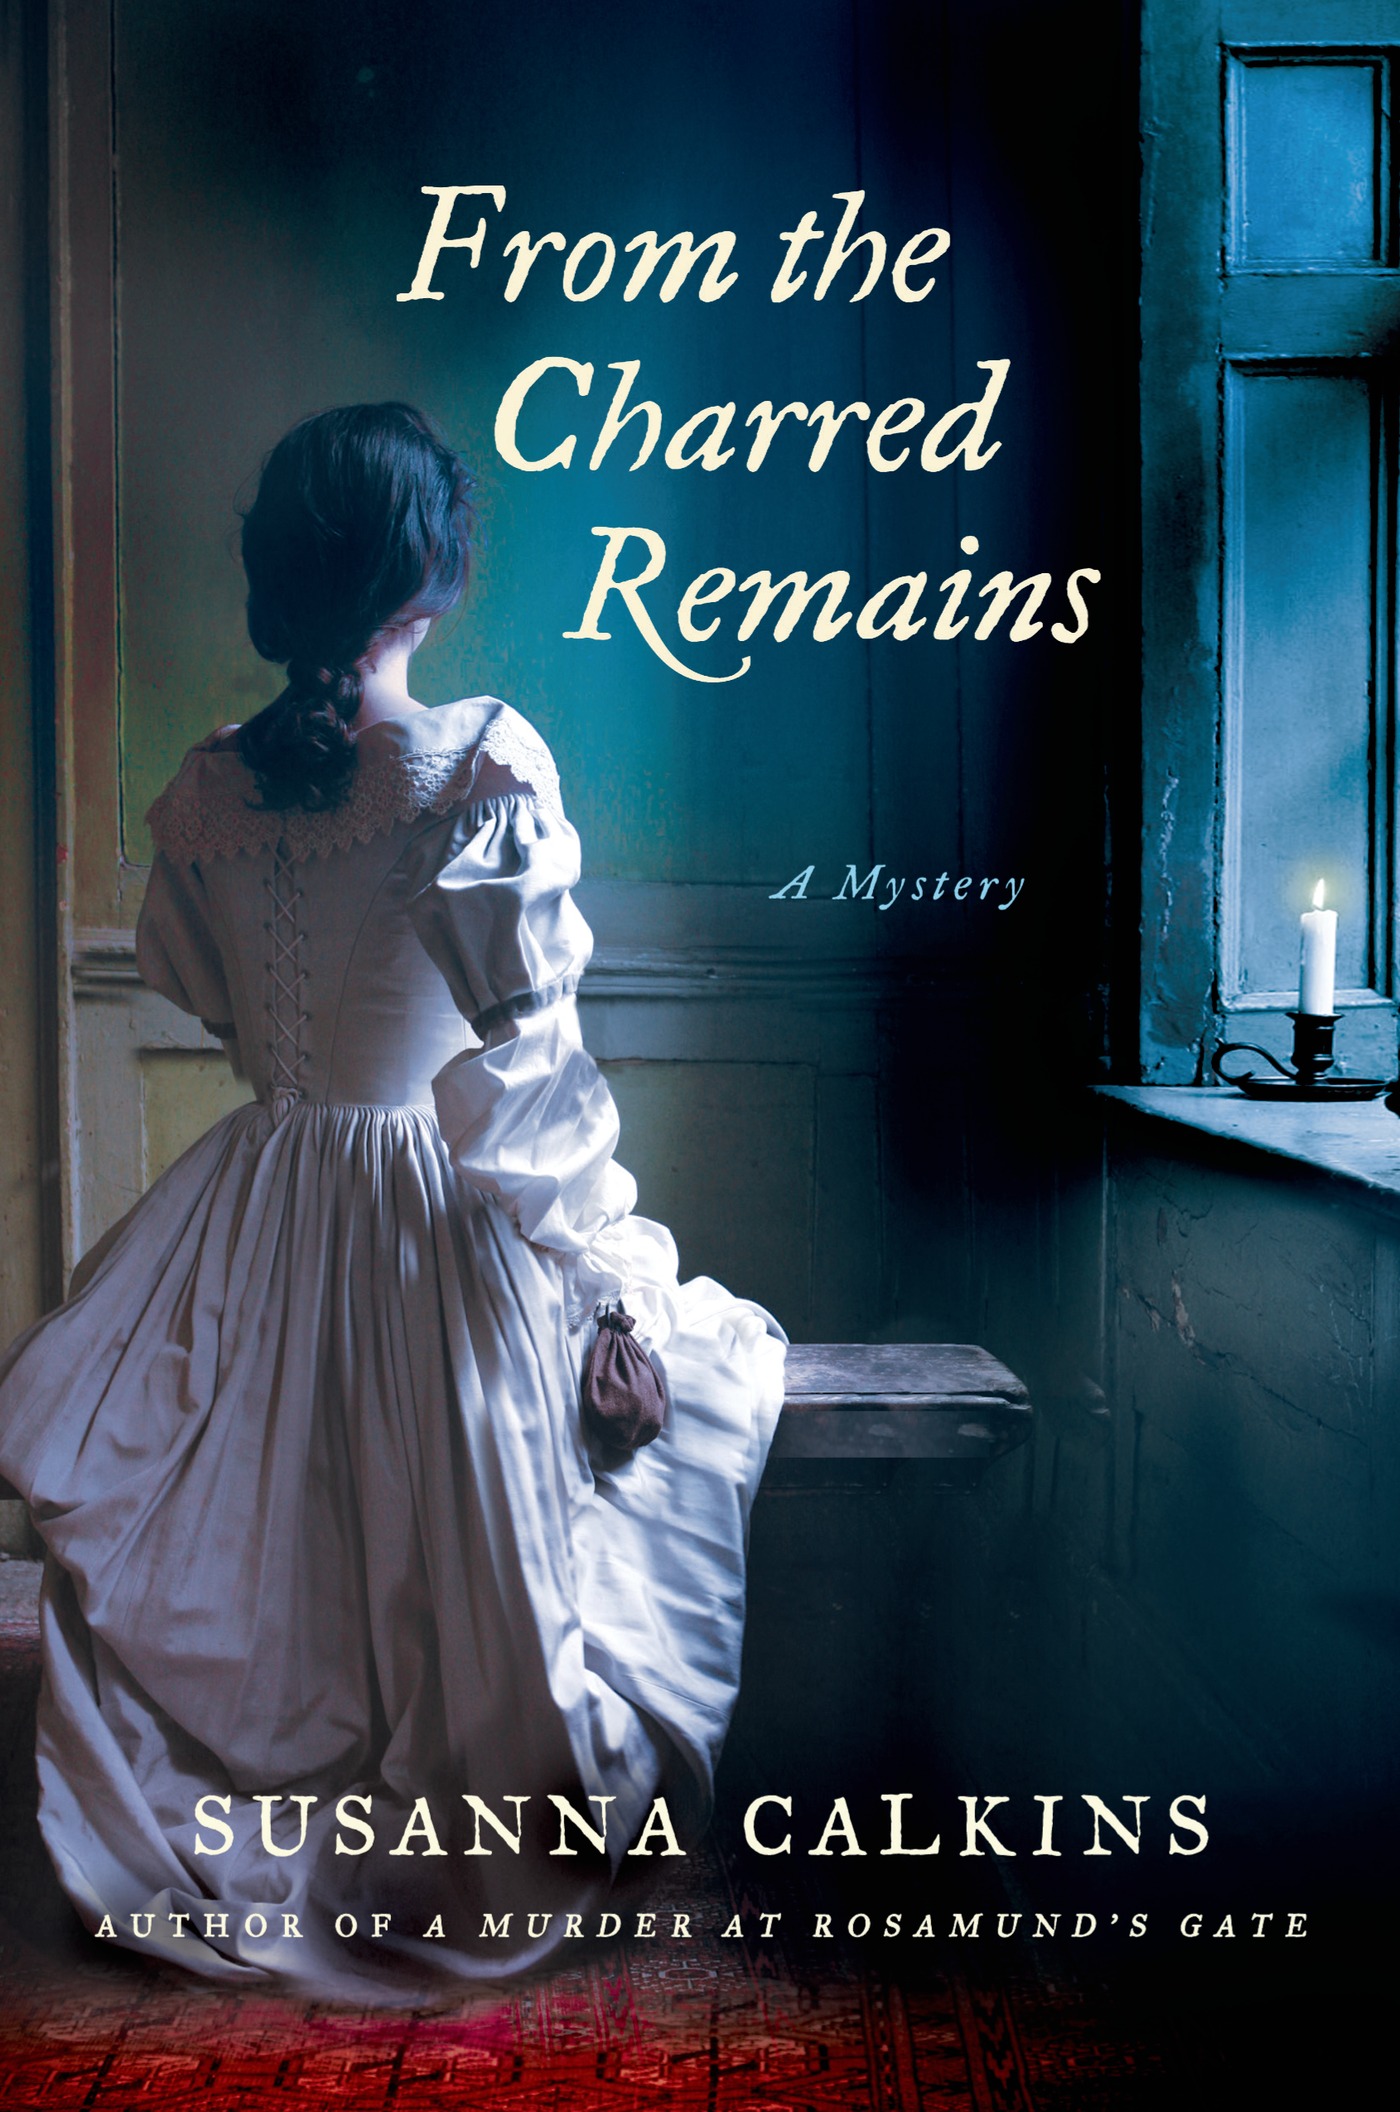 From the charred remains cover image